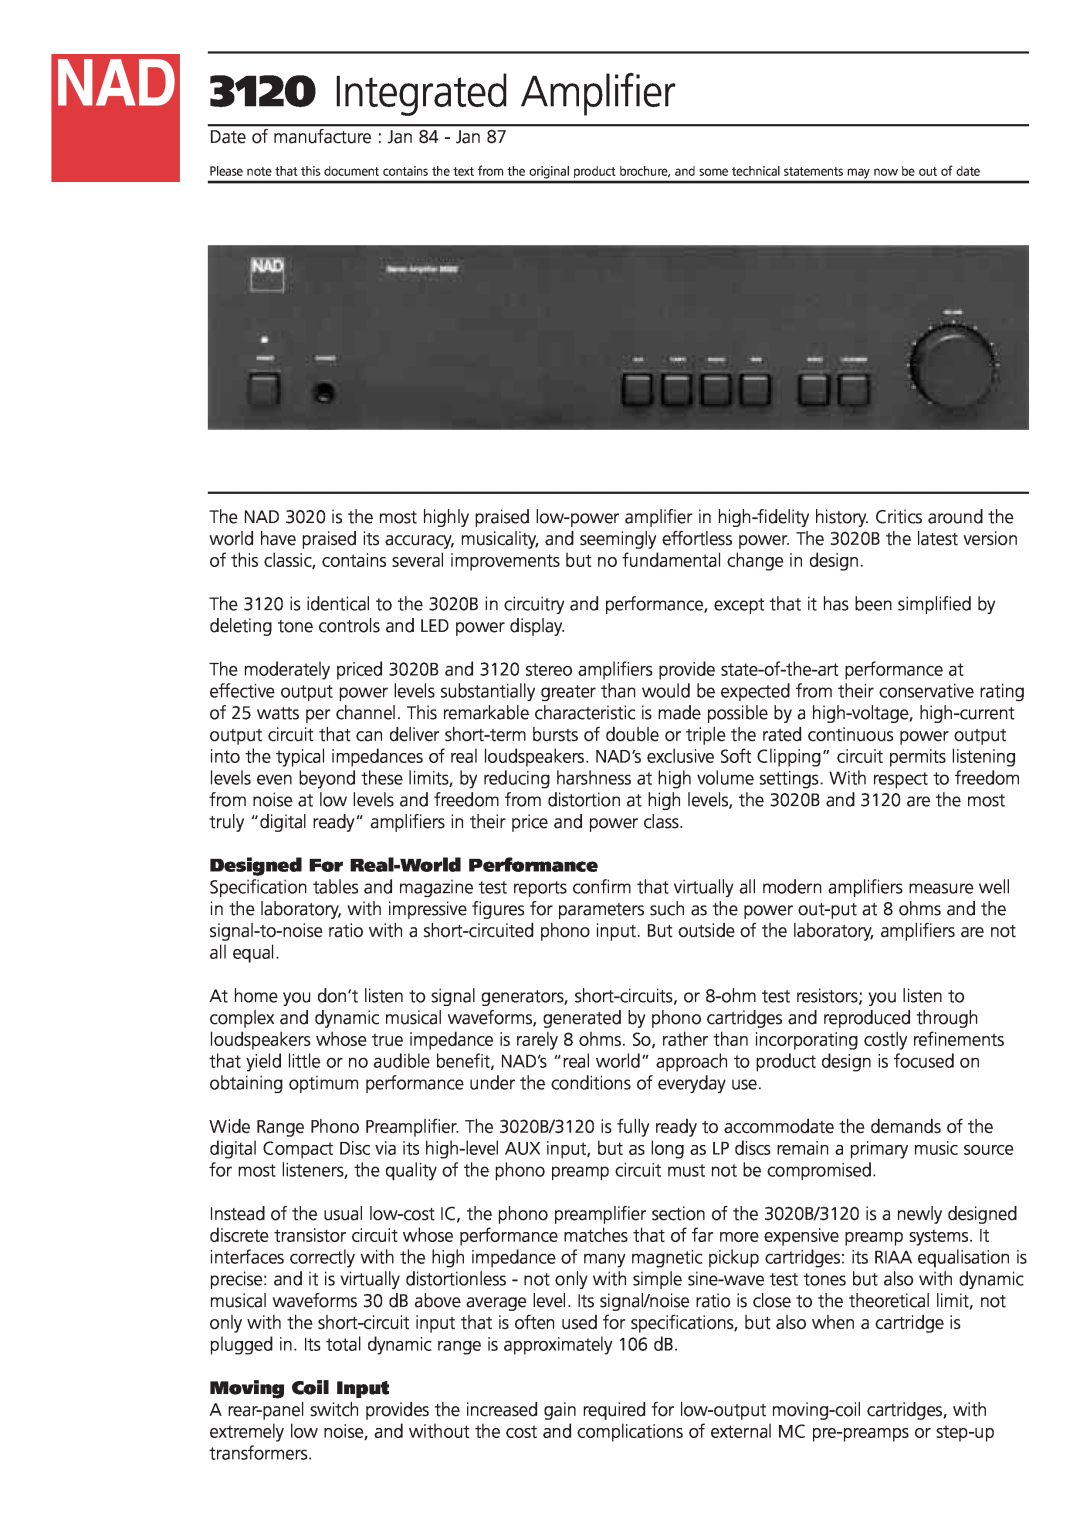 NAD 3120 brochure Designed For Real-WorldPerformance, Moving Coil Input, Integrated Amplifier 